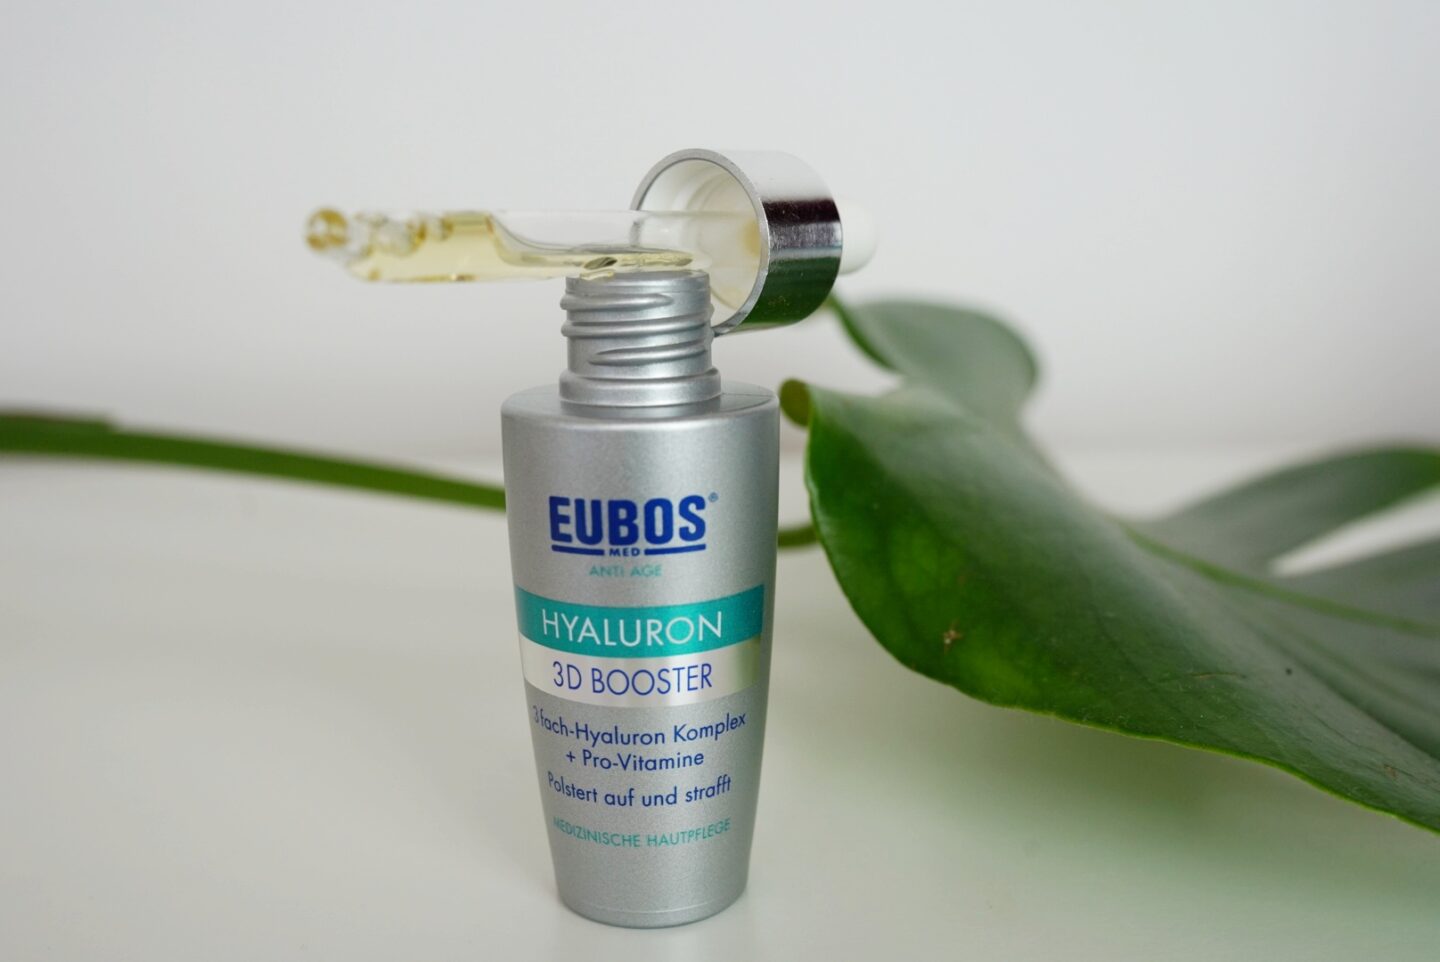 Eubos Hyaluron antiage 3D booster